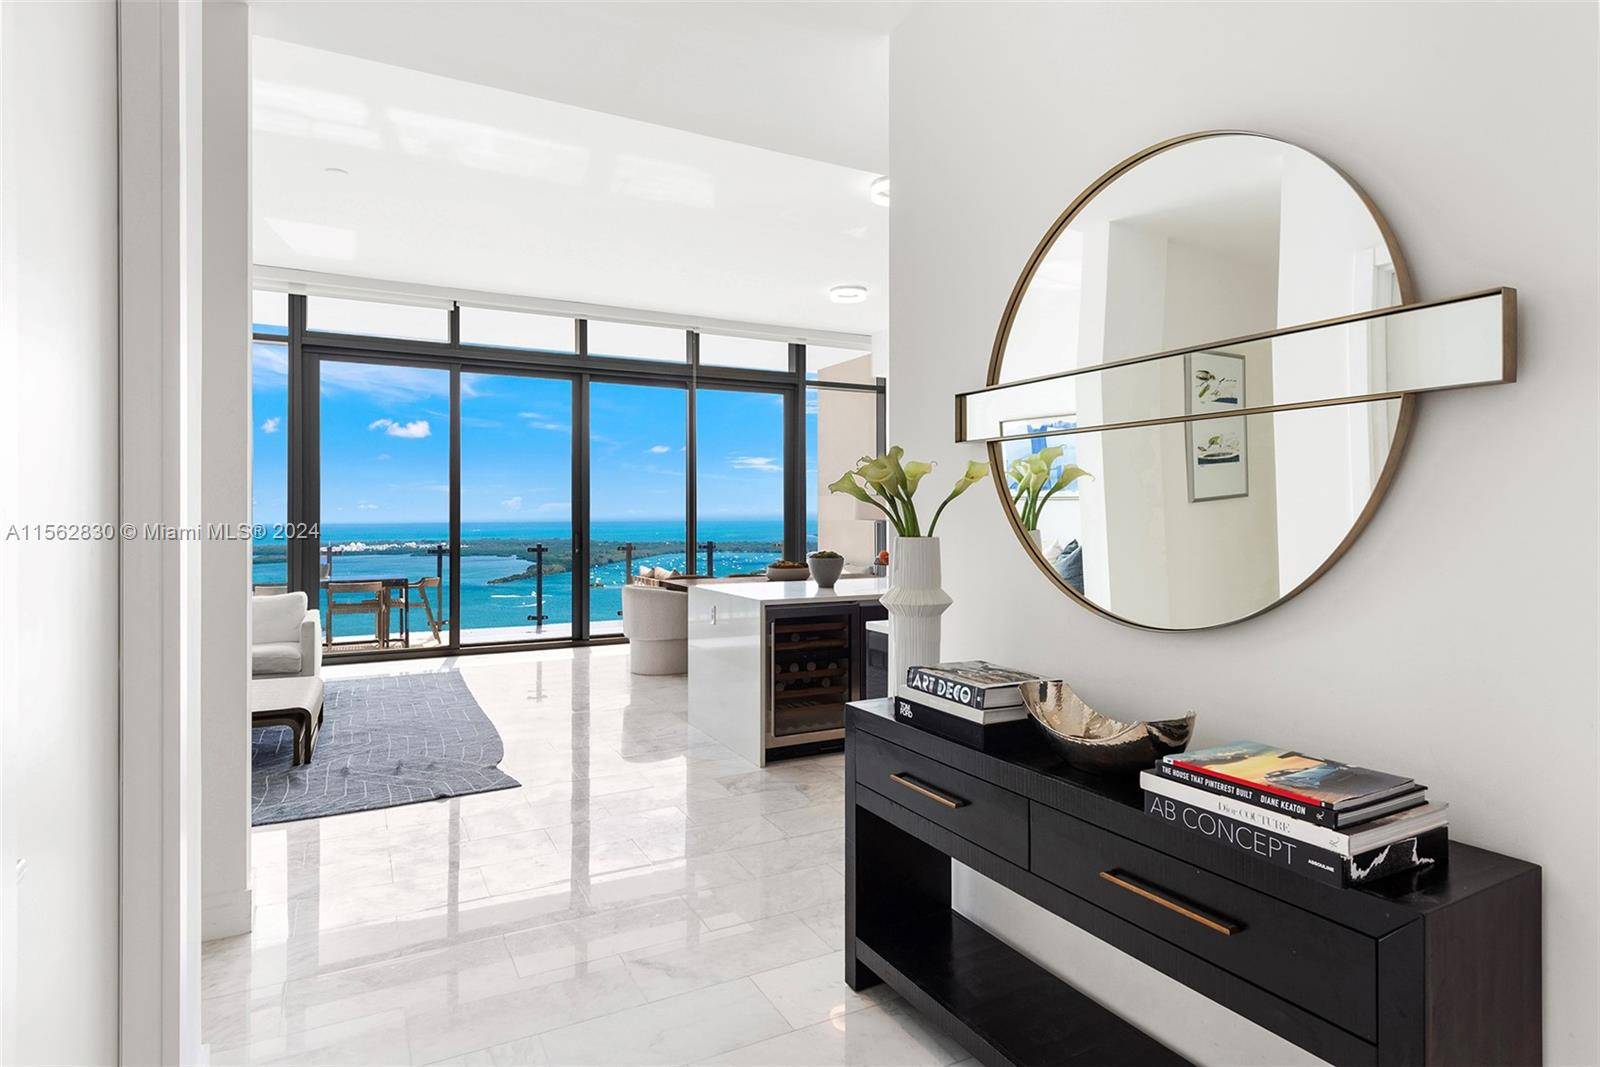 Experience the pinnacle of luxury living in this lower penthouse unit at Echo Brickell featuring 3 bedrooms and 3.